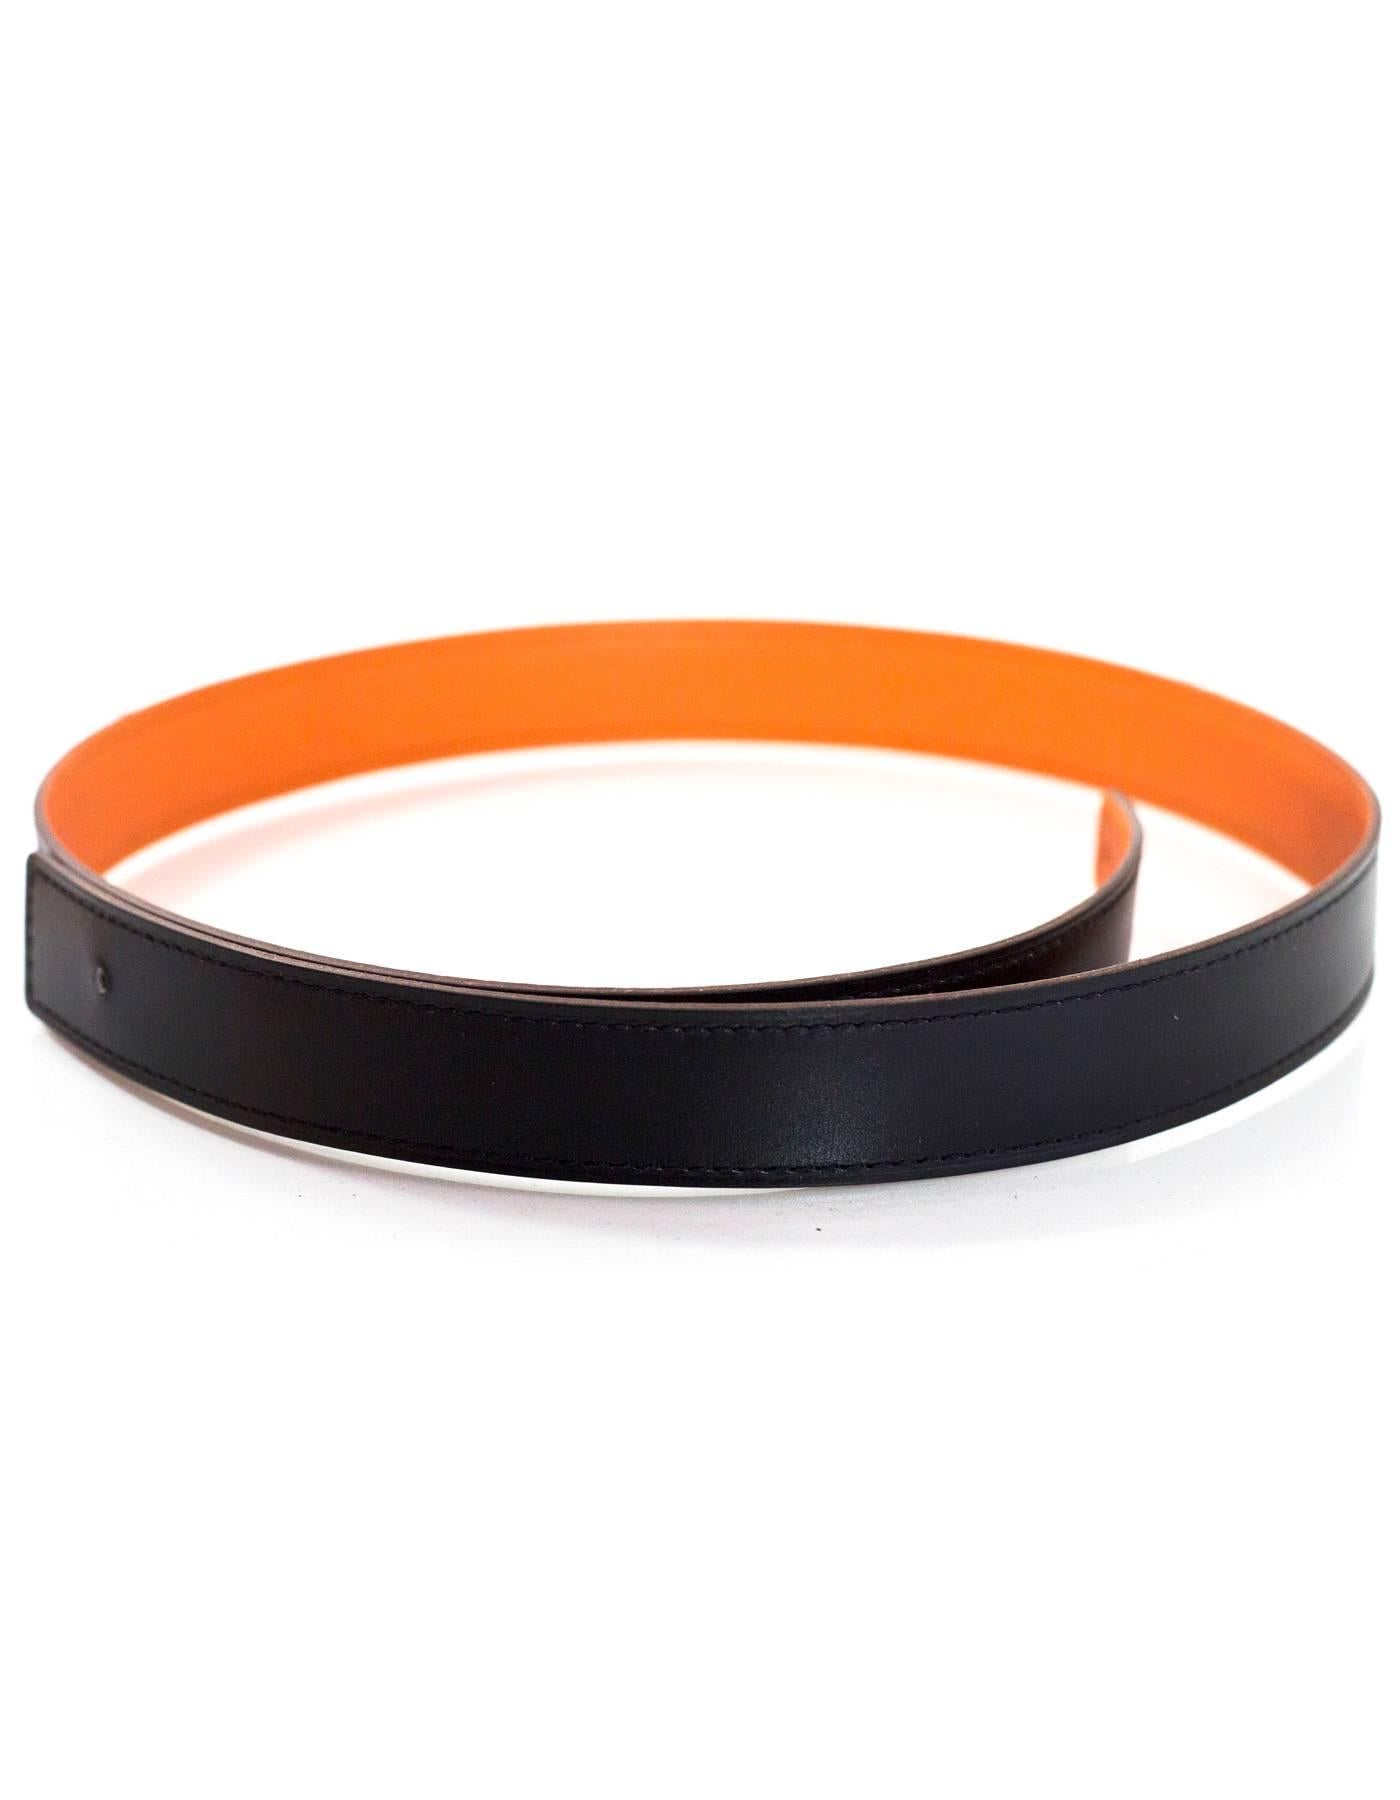 Hermes Black Swift & Orange Clemence 24mm Reversible Belt Strap
**NOTE: Belt does NOT come with H buckle seen in picture**

Made In: France
Year of Production: 2007
Color: Black and orange
Materials: Swift and clemence leather
Closure/Opening: